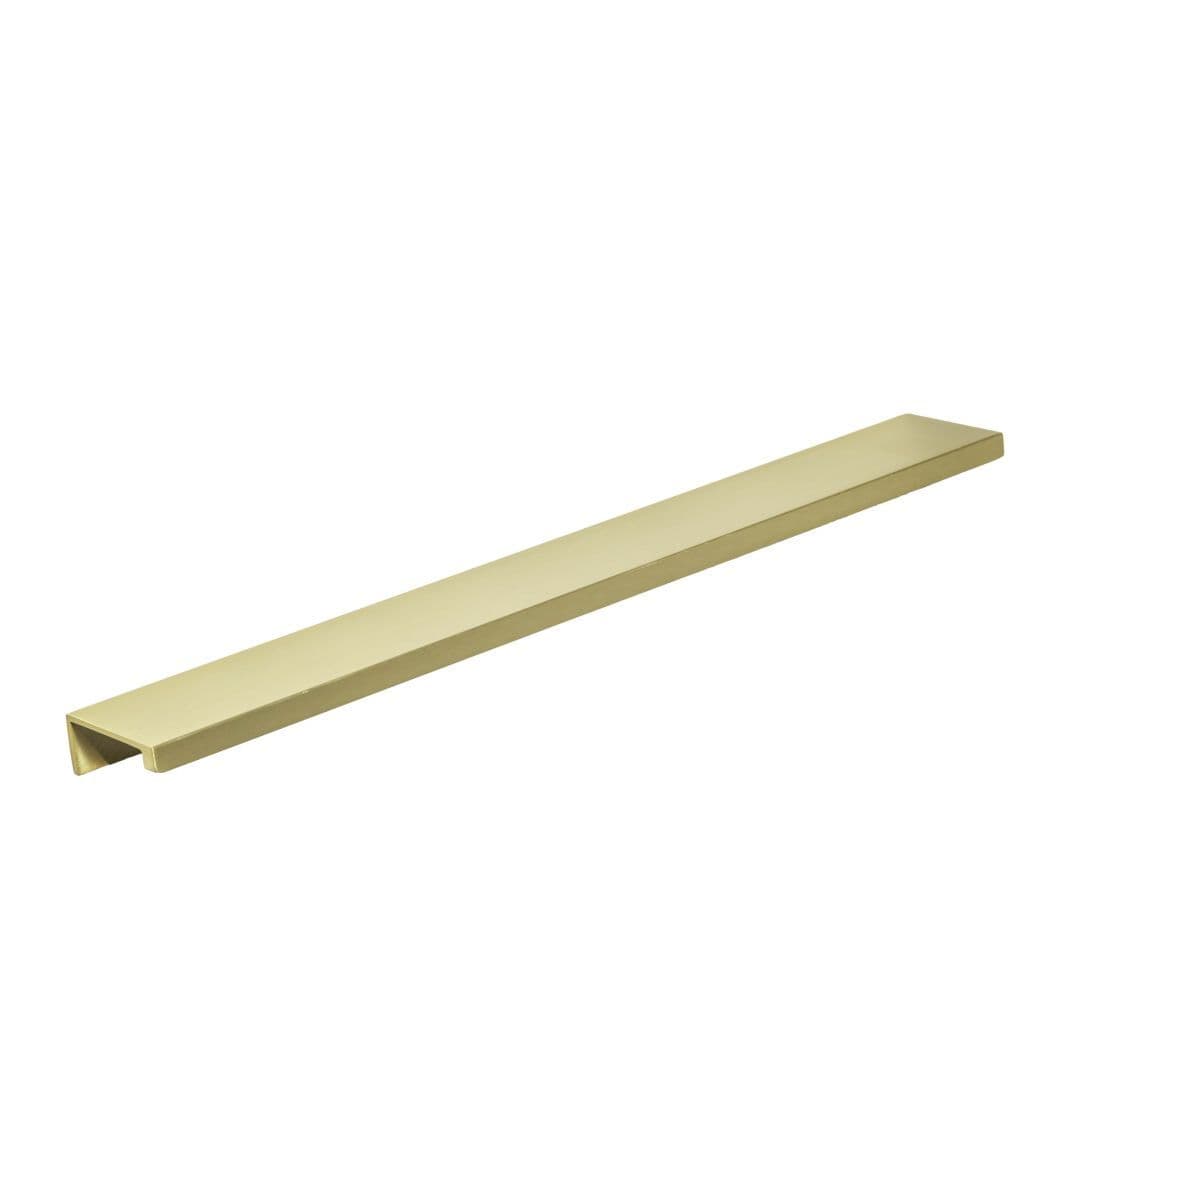 MARLOW REAR FIXED TRIM Cupboard Handle - 2 sizes - BRUSHED BRASS finish (PWS H1148.204 / 300.BHB)